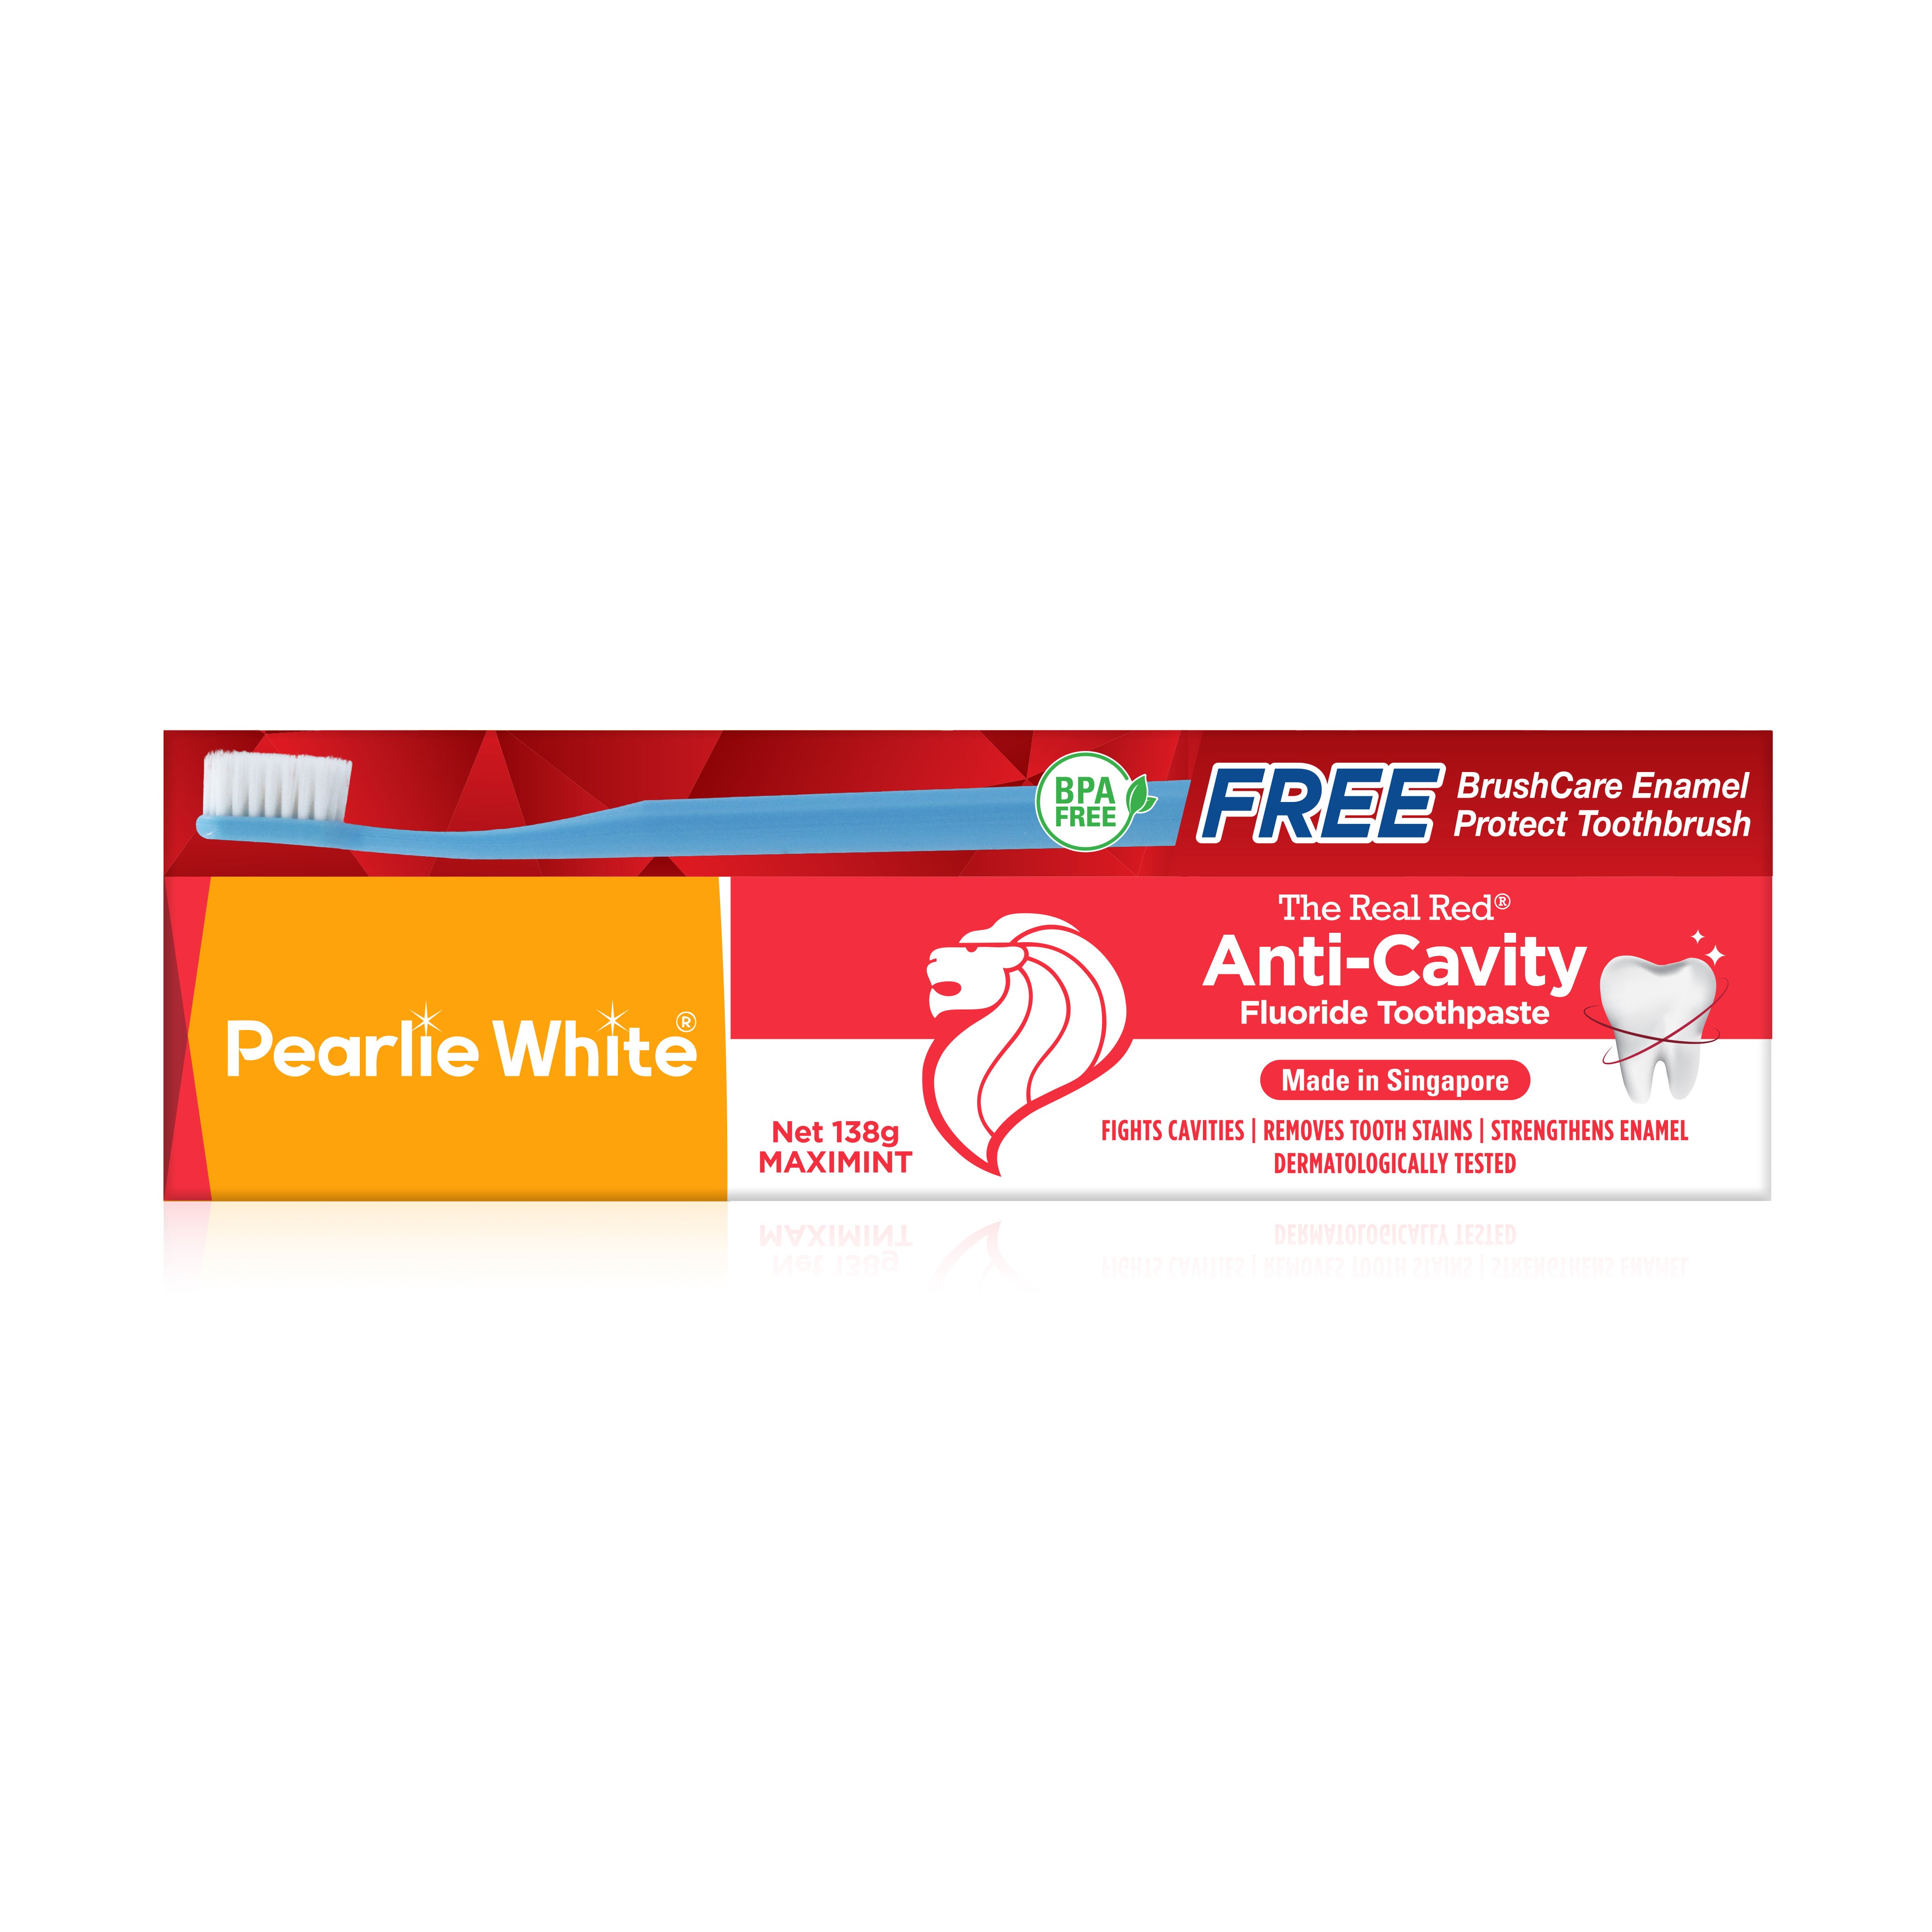 The Real Red® Anti-Cavity Fluoride Toothpaste 138g Bundle